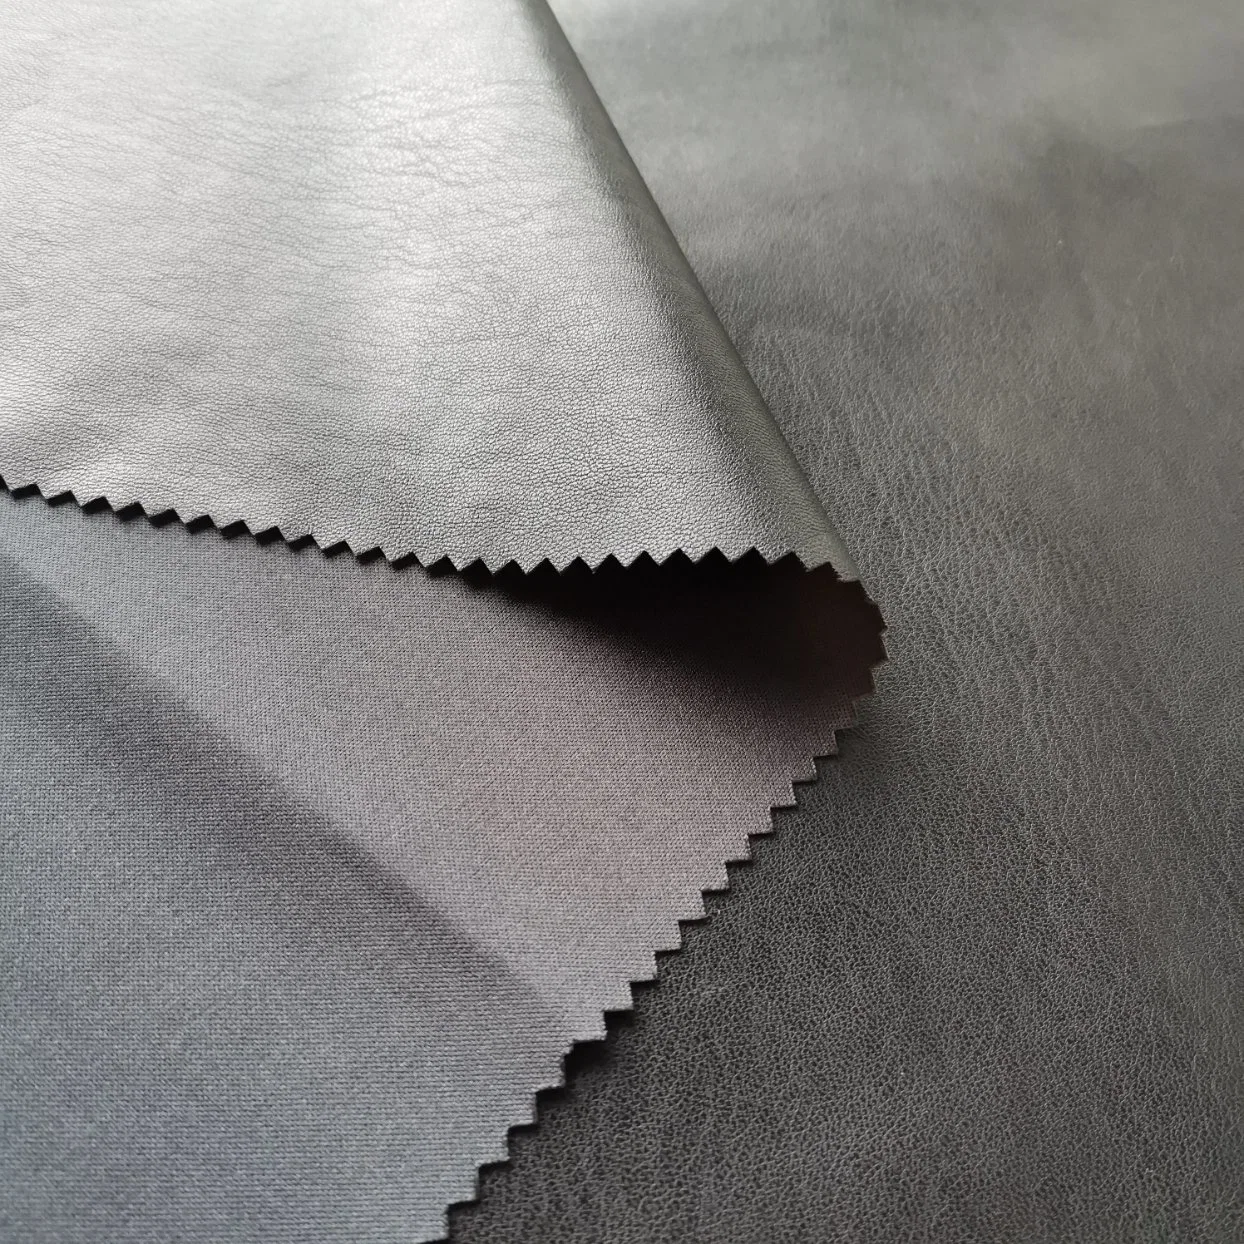 Cheap Synthetic PU Leather with Stretch Backing for Trousers